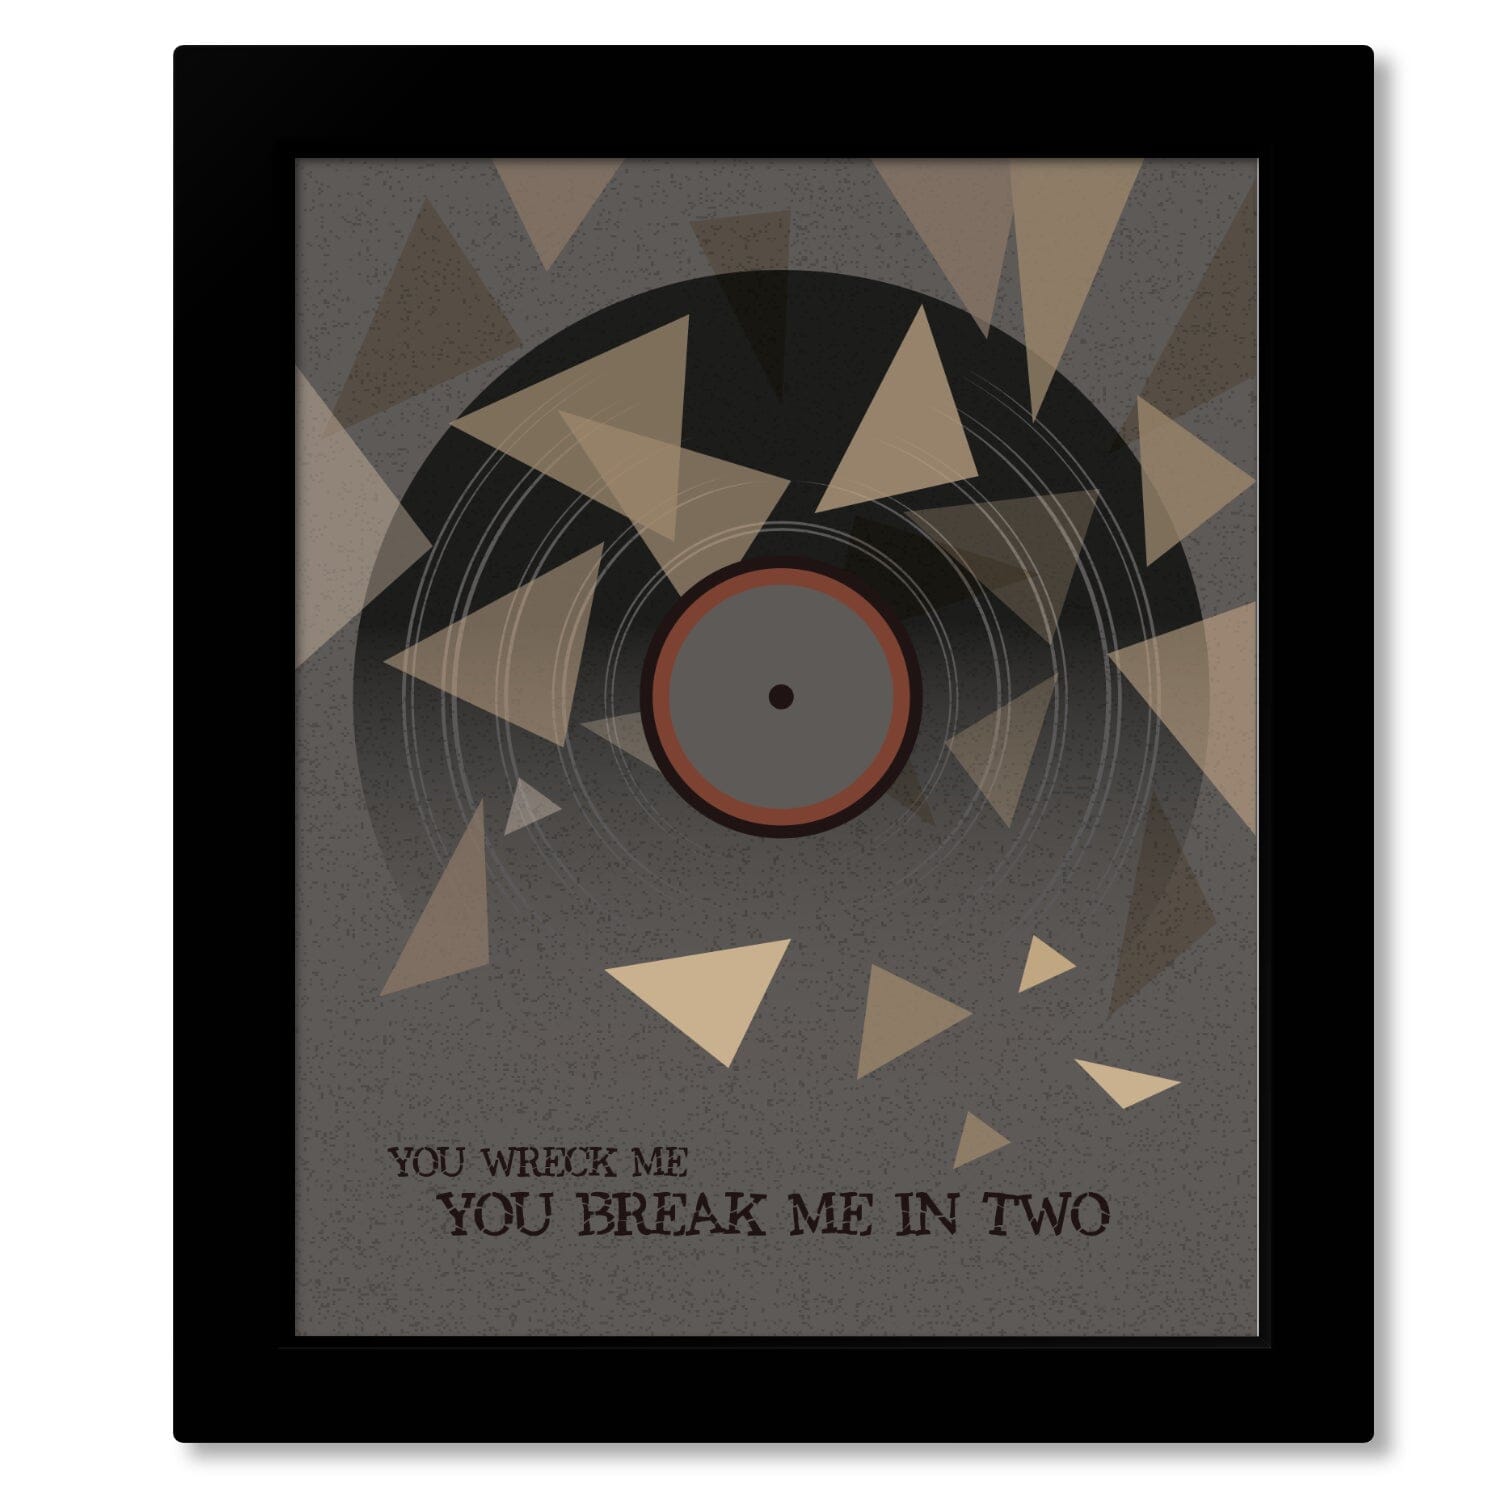 You Wreck me by Tom Petty - Song Lyrics Art Poster Print Song Lyrics Art Song Lyrics Art 8x10 Framed Print (without mat) 